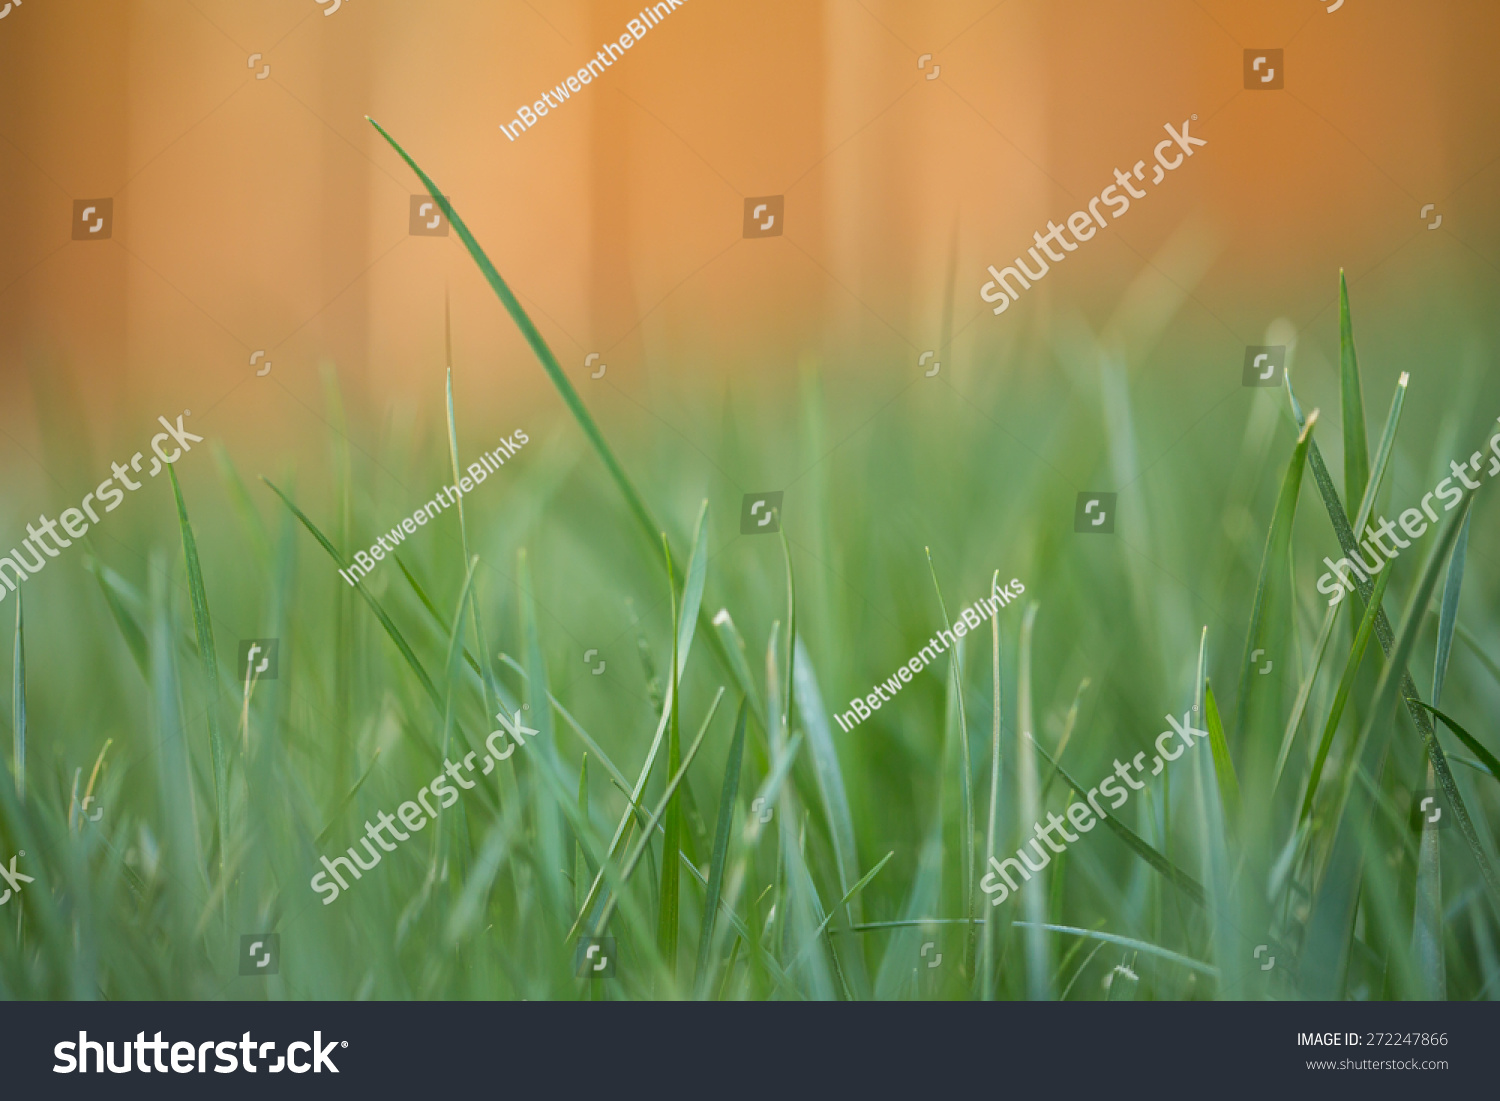 Blurred Image Of Grass For Background Stock Photo 272247866 : Shutterstock